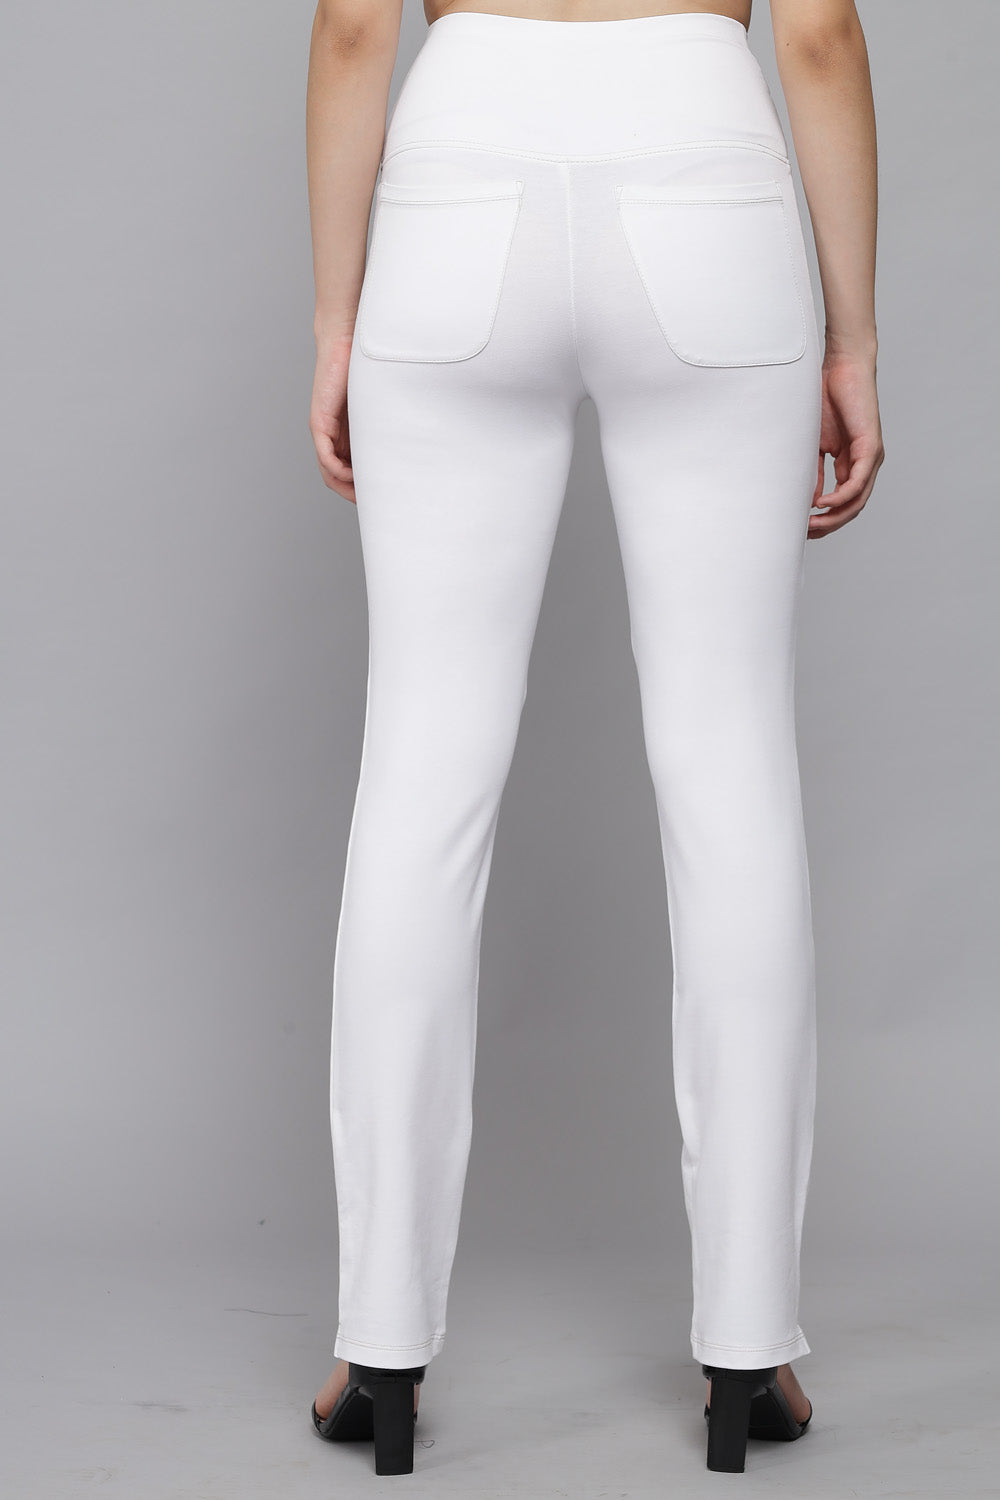 Narrow Fit Trousers  Buy Narrow Fit Trousers online in India